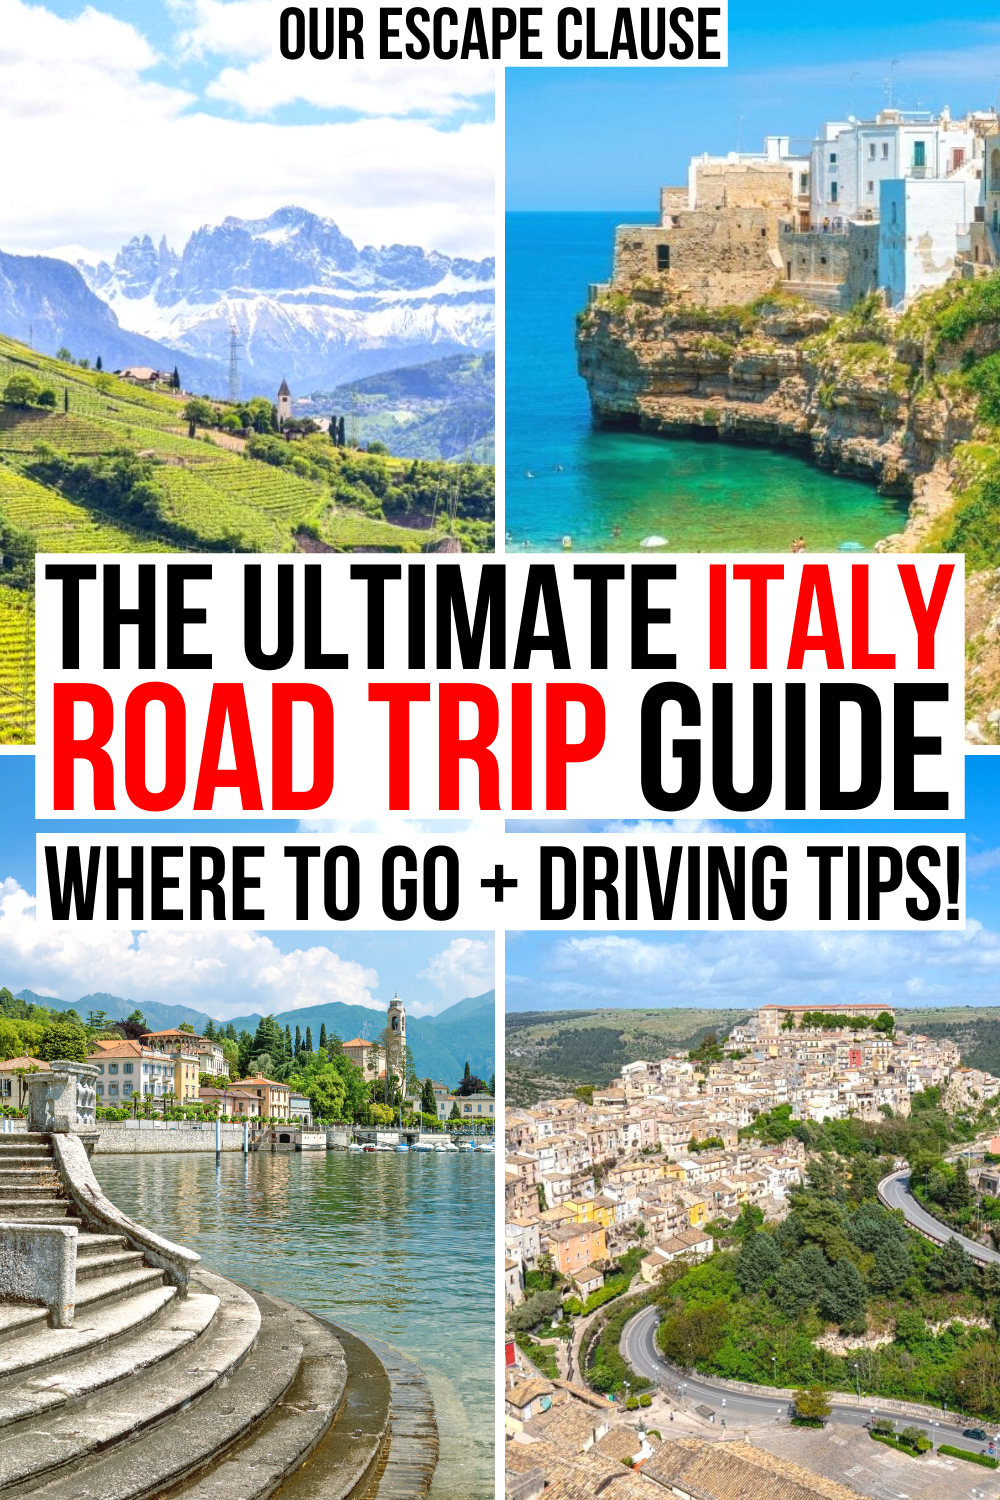 7 Phenomenal Italy Road Trip Ideas (+ Driving Tips!) Our Escape Clause